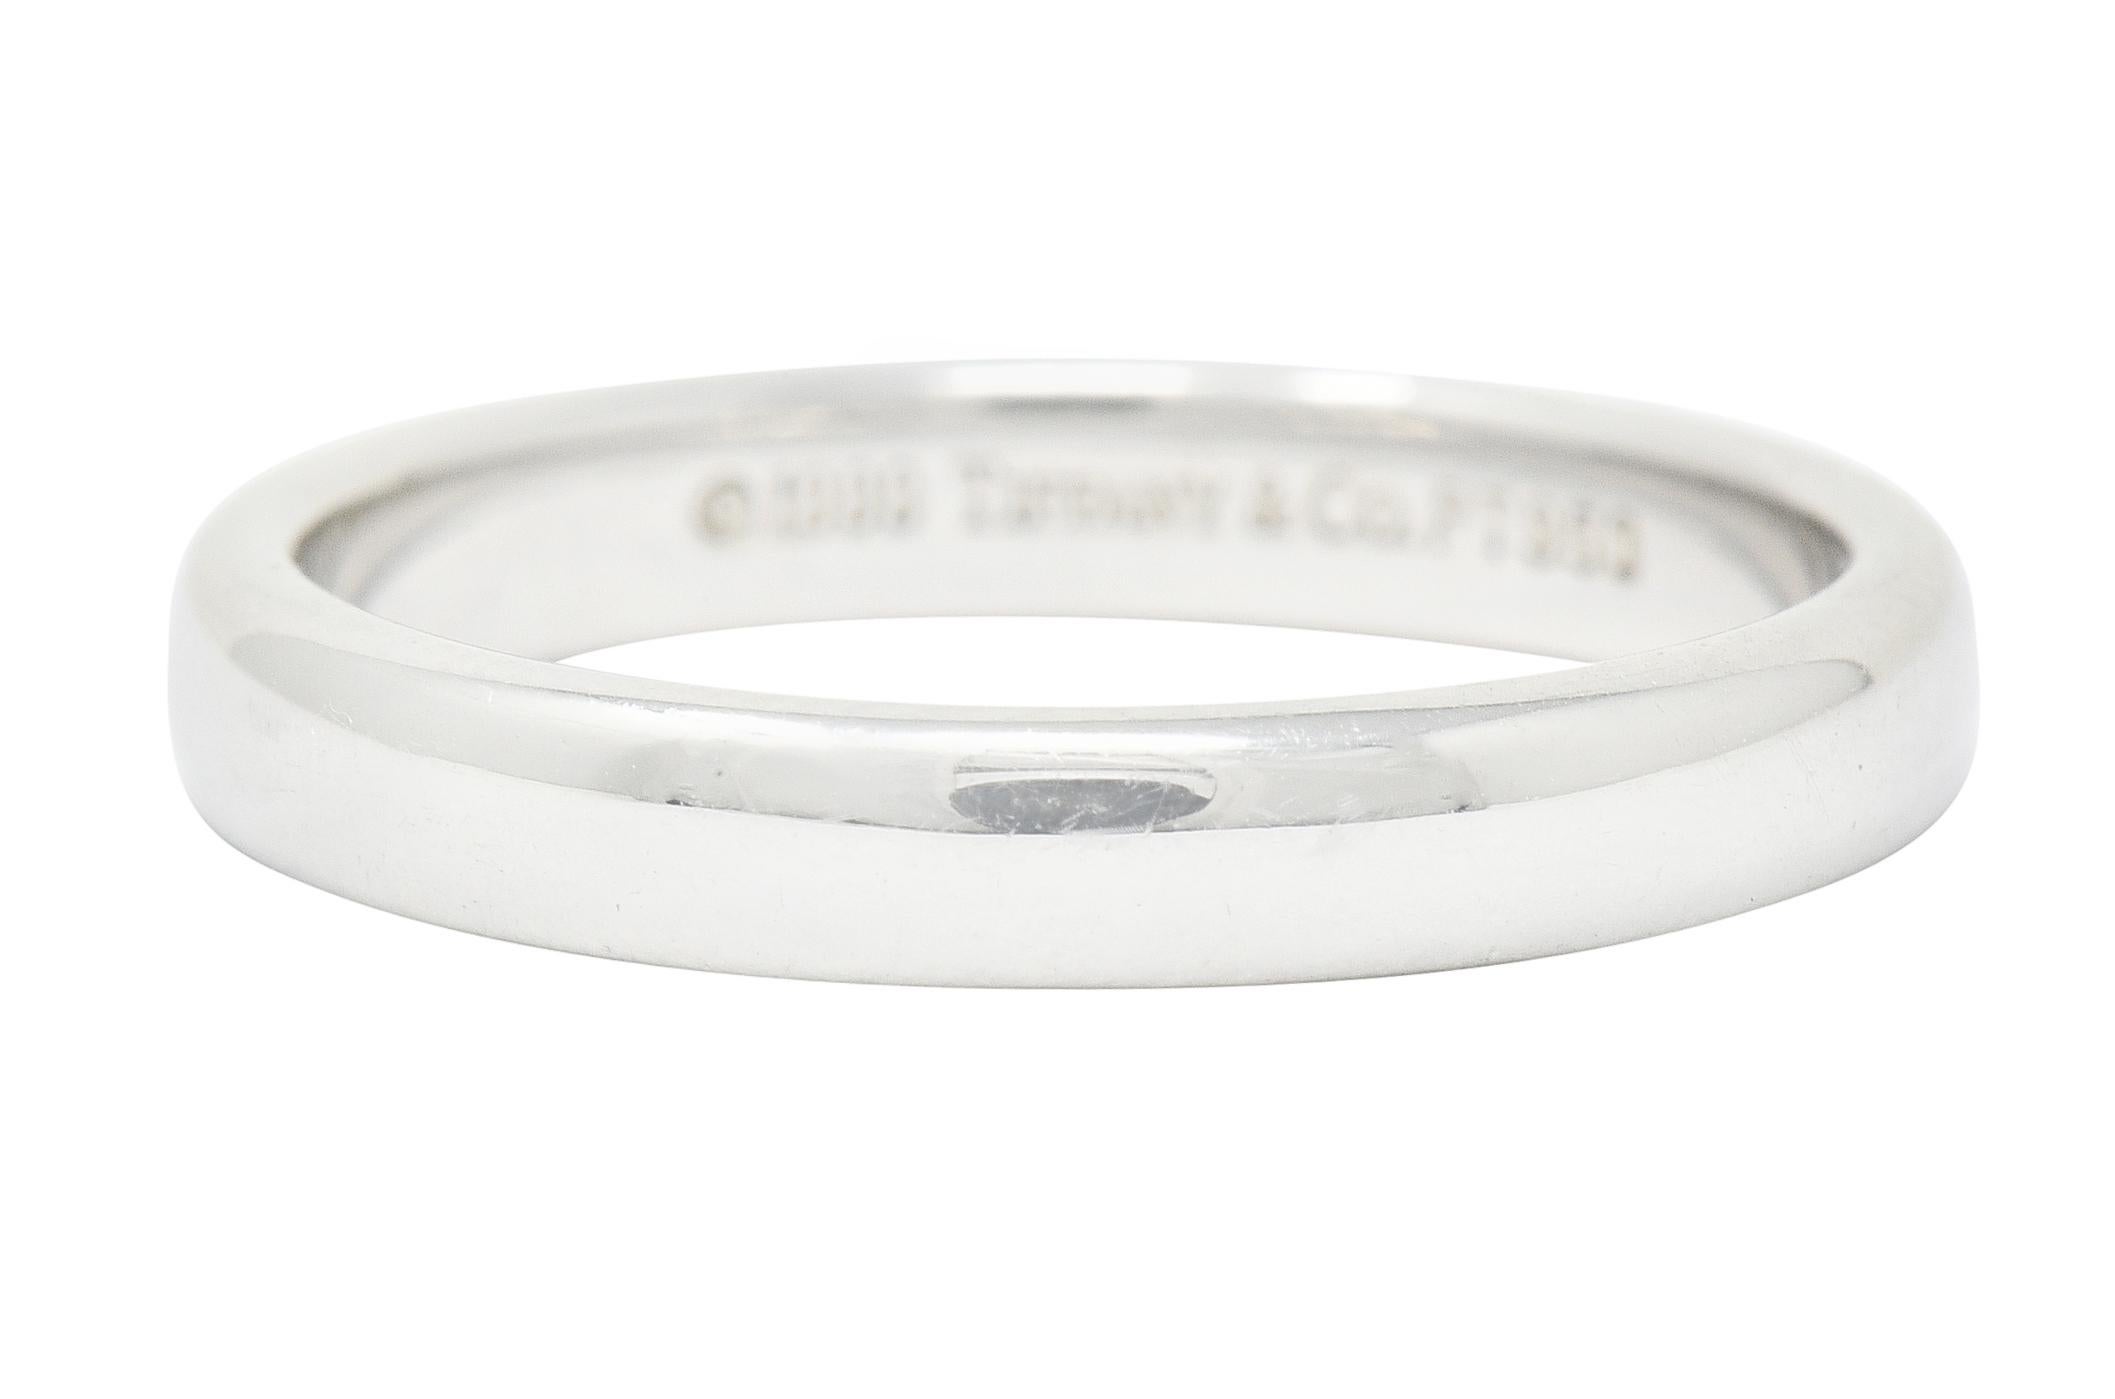 Band style ring designed with a very slight domed curvature and rounded edges for a comfort fit

Completed by a high polish

Fully signed 1990 Tiffany & Co.

Stamped PT950 for platinum

Ring Size: 5 1/2 & sizable

Measures: 3.1 mm wide and sits 1.5